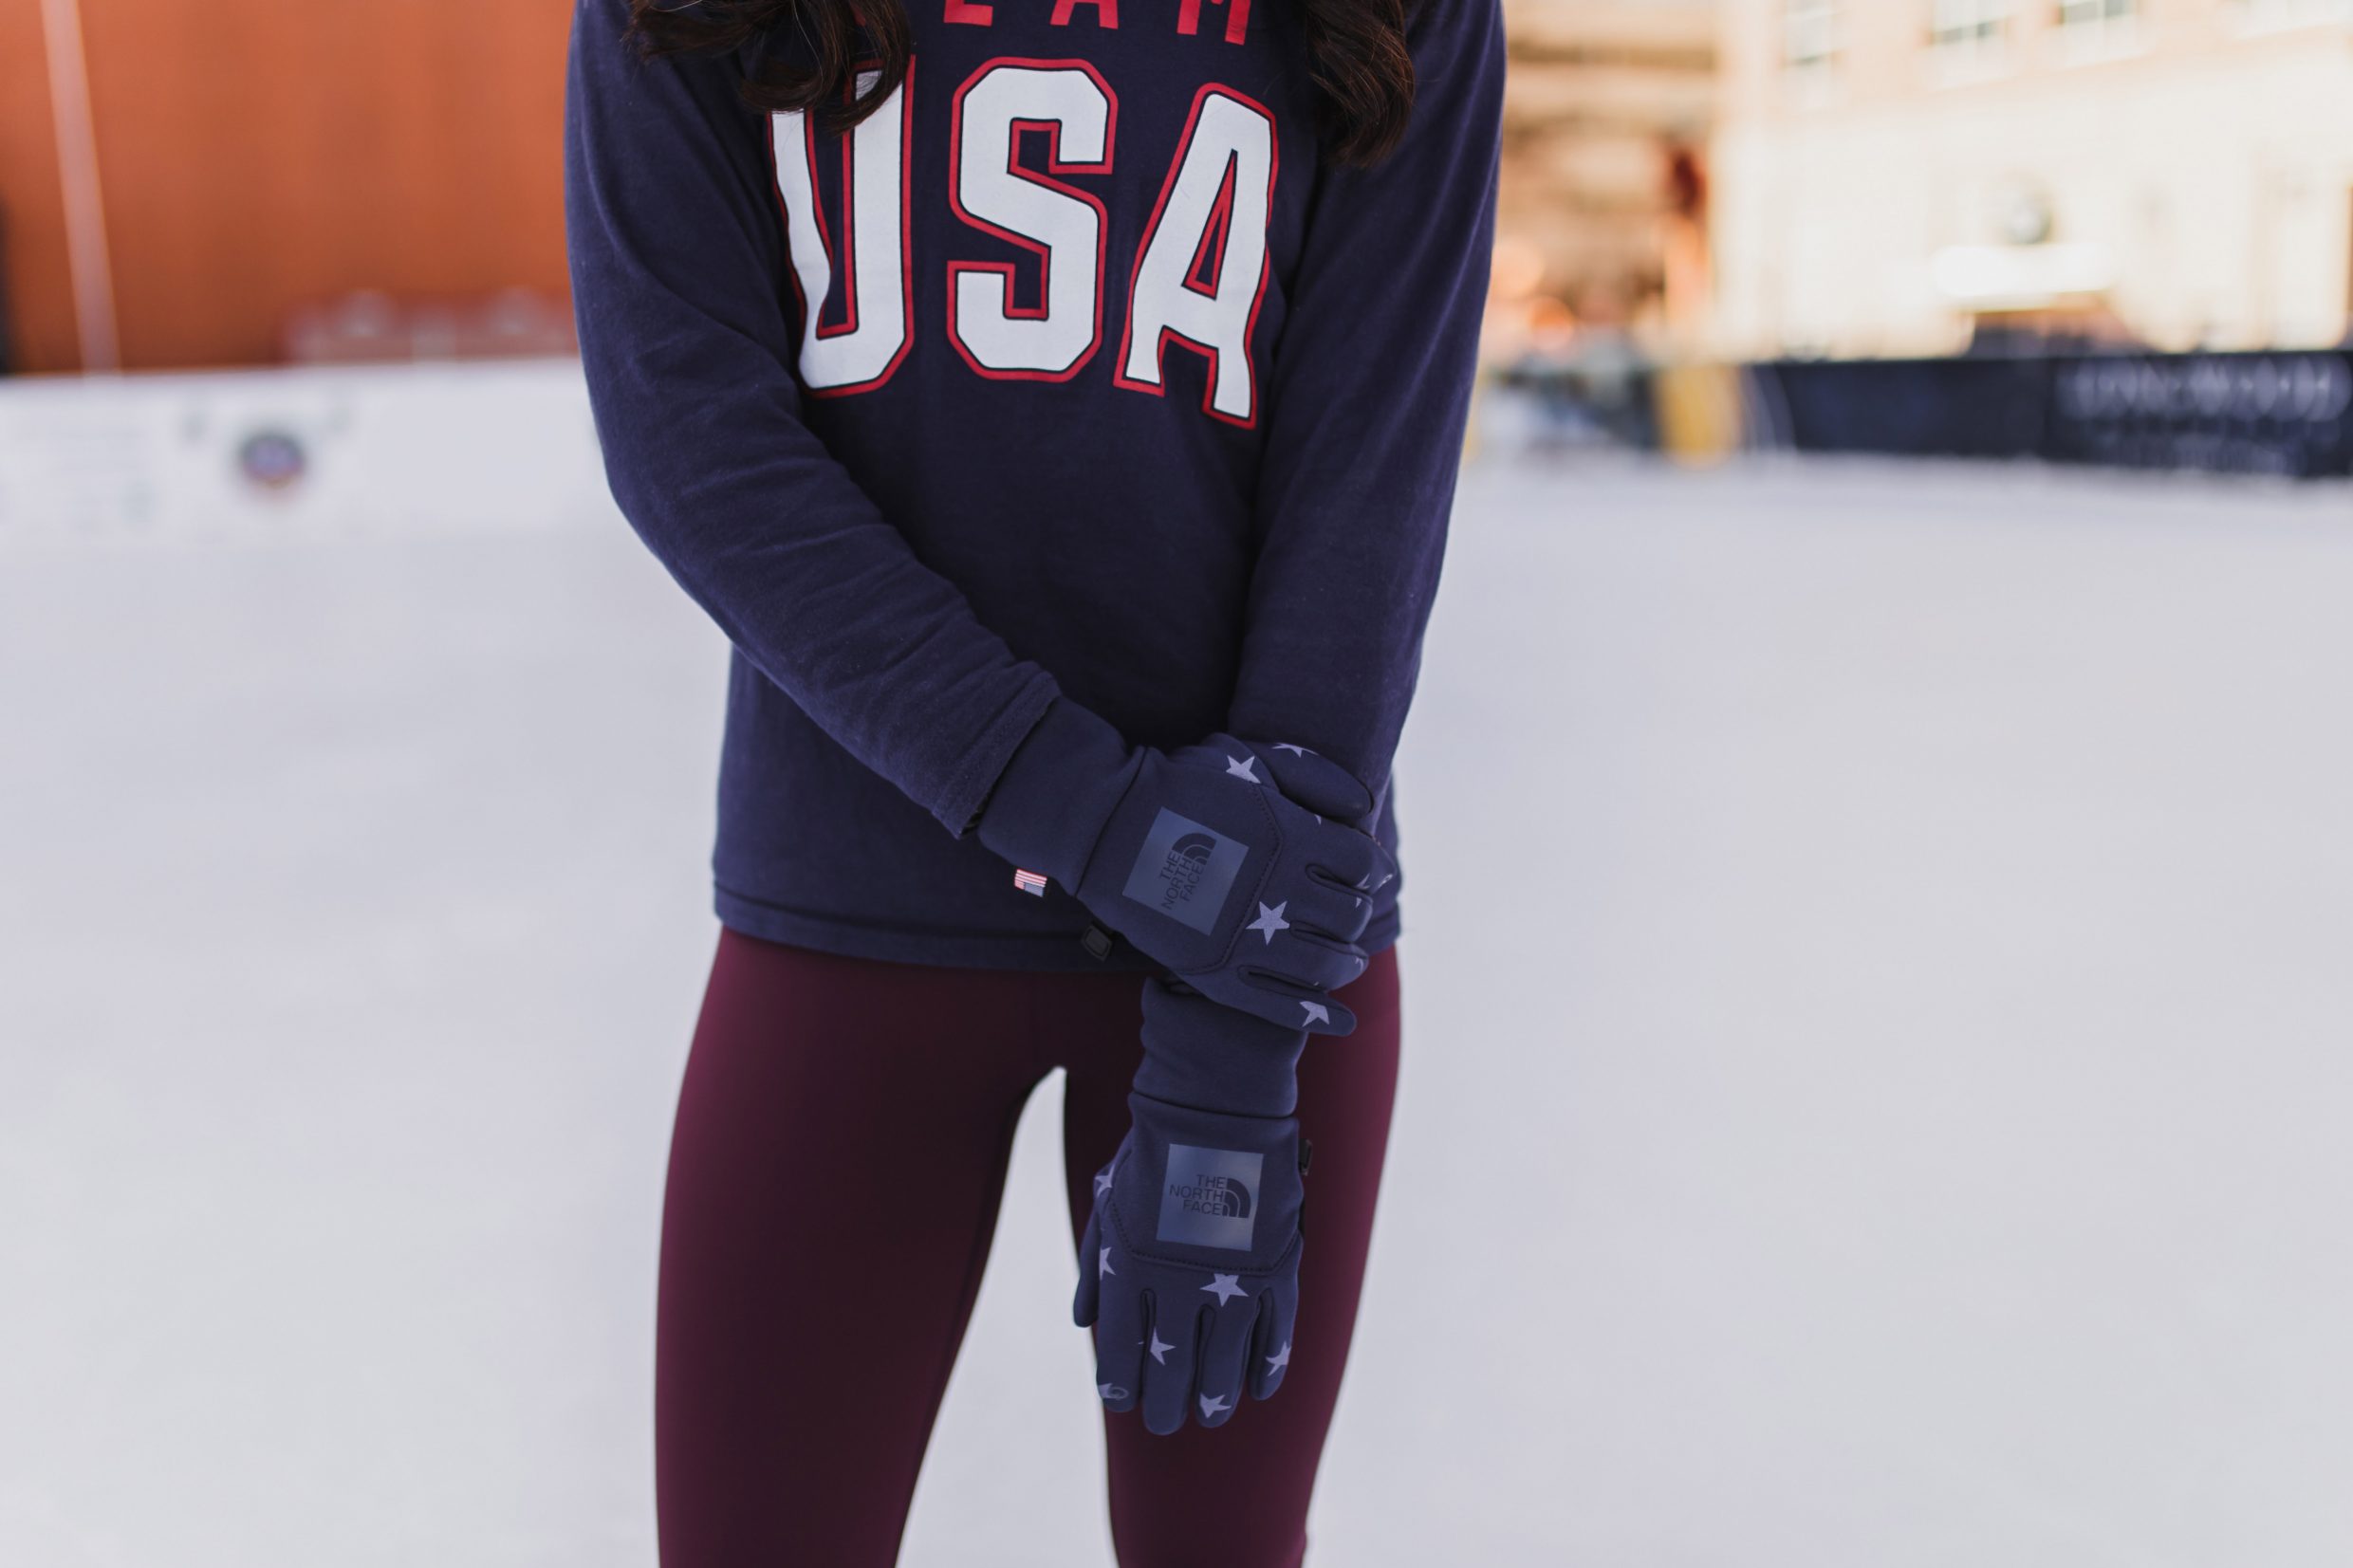 Team USA look for 2018 PyeongChang Olympics with burgundy leggings and IC gloves